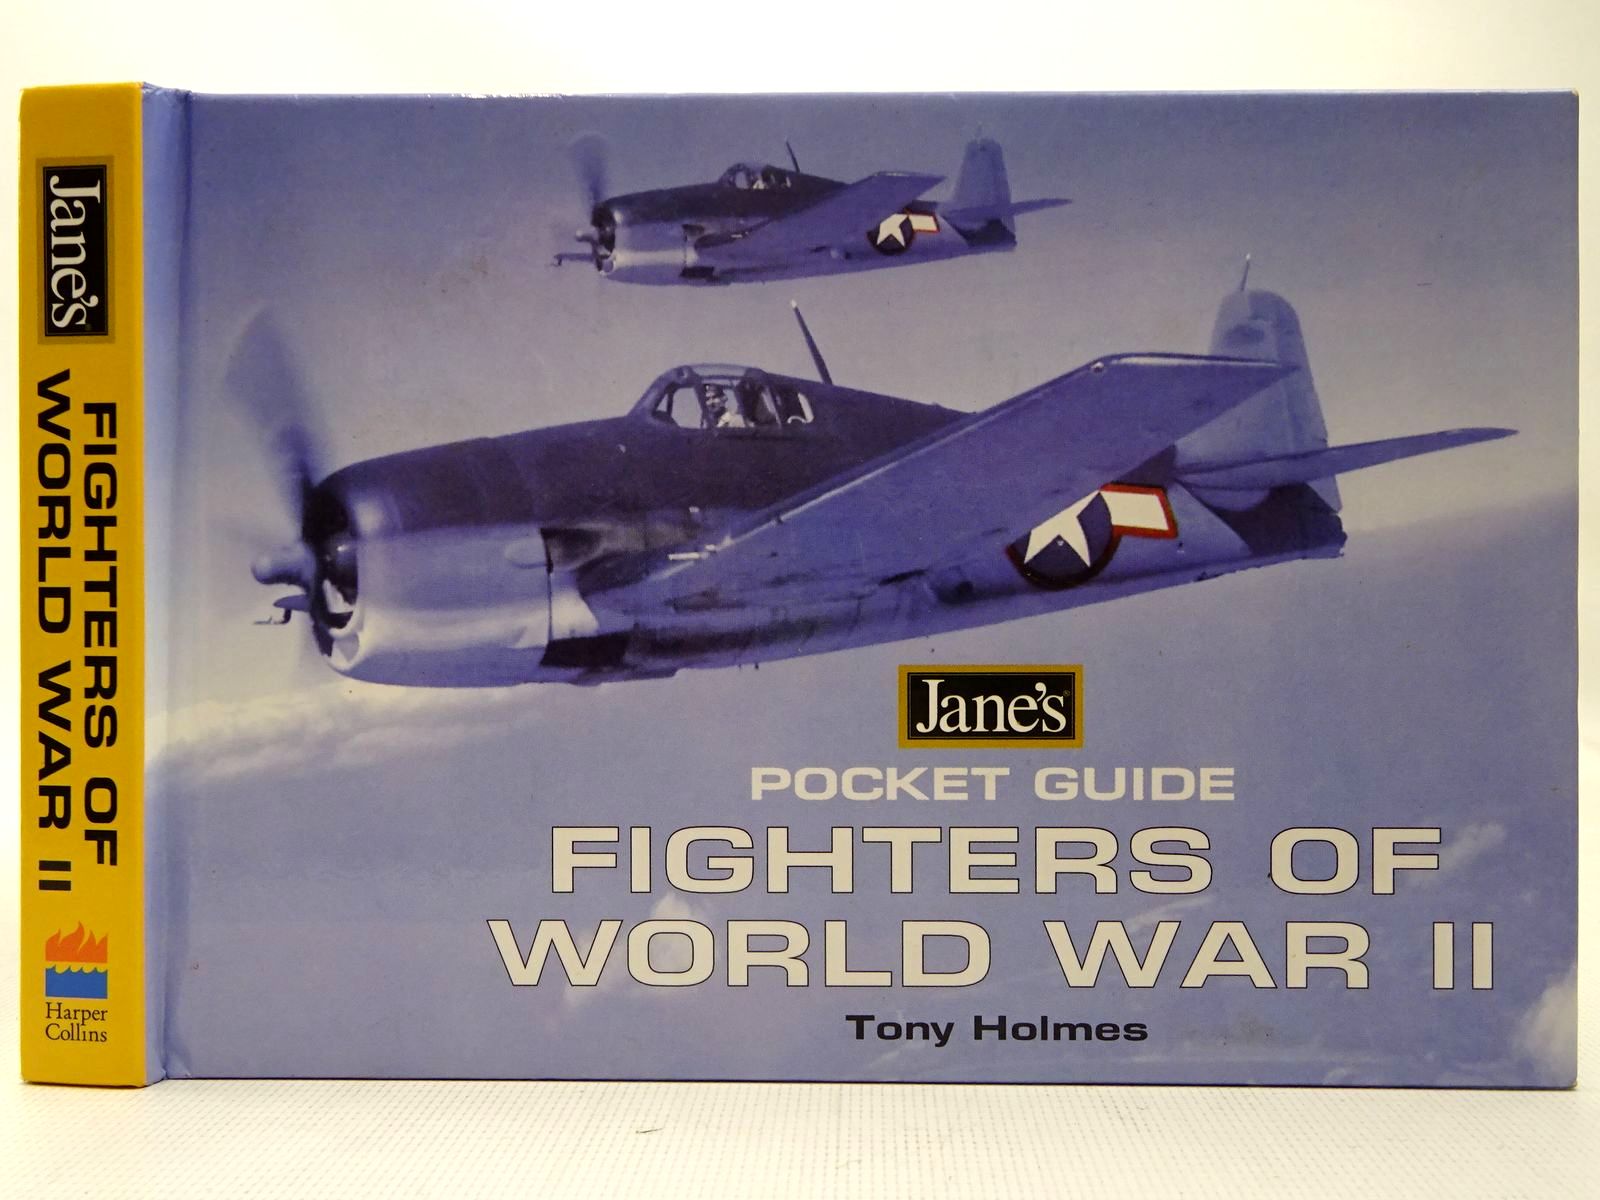 Photo of JANE'S POCKET GUIDE FIGHTERS OF WORLD WAR II written by Holmes, Tony published by Harper Collins (STOCK CODE: 2126850)  for sale by Stella & Rose's Books